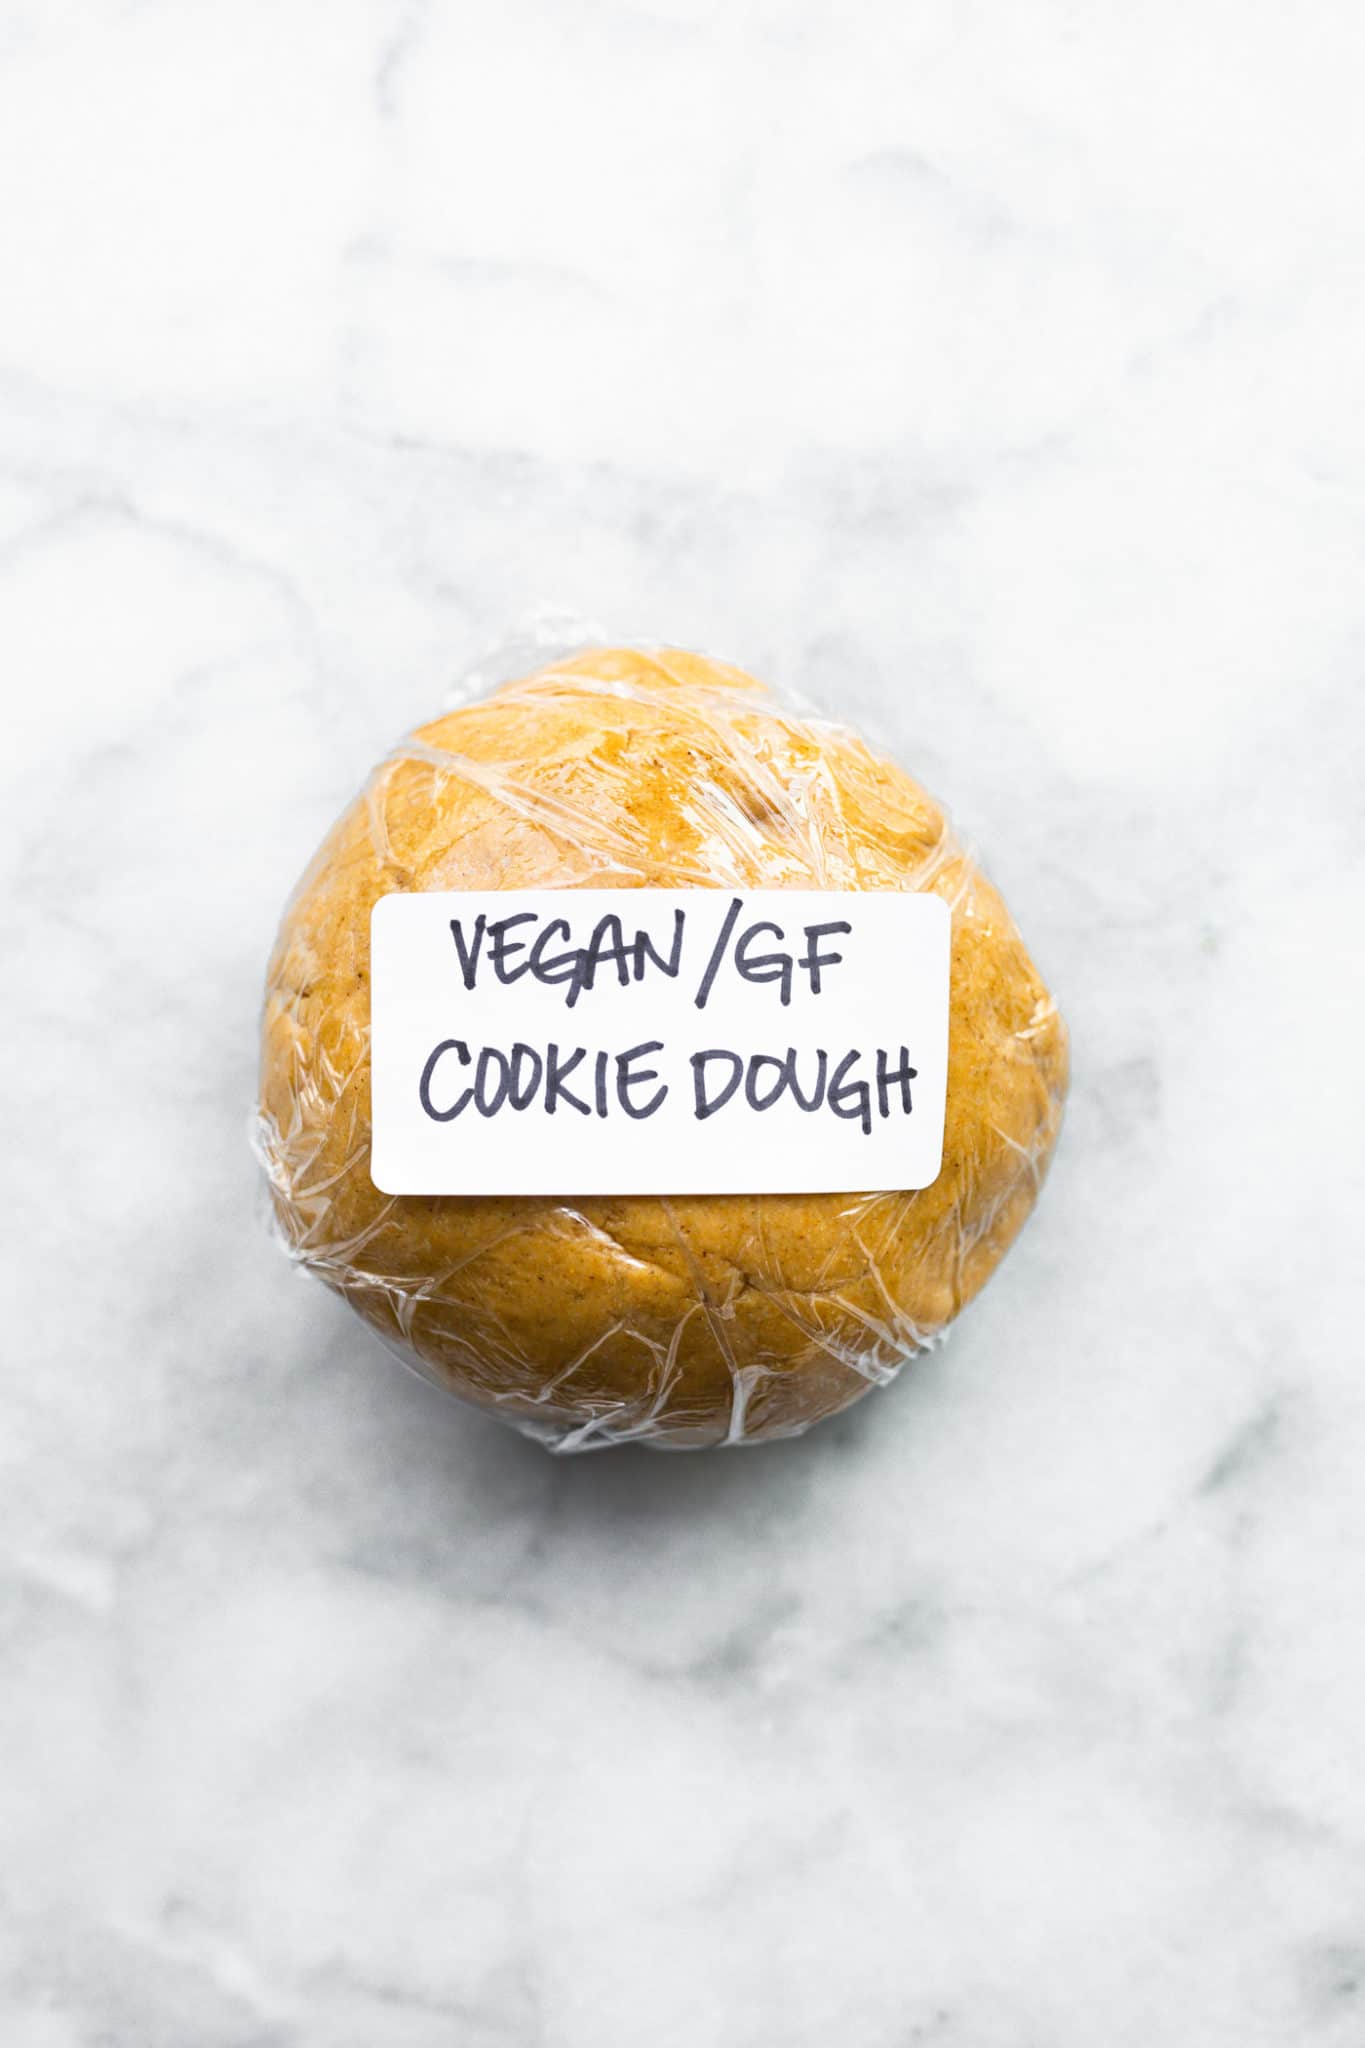 Vegan and gluten free cookie dough rolled into a ball and wrapped with cling wrap